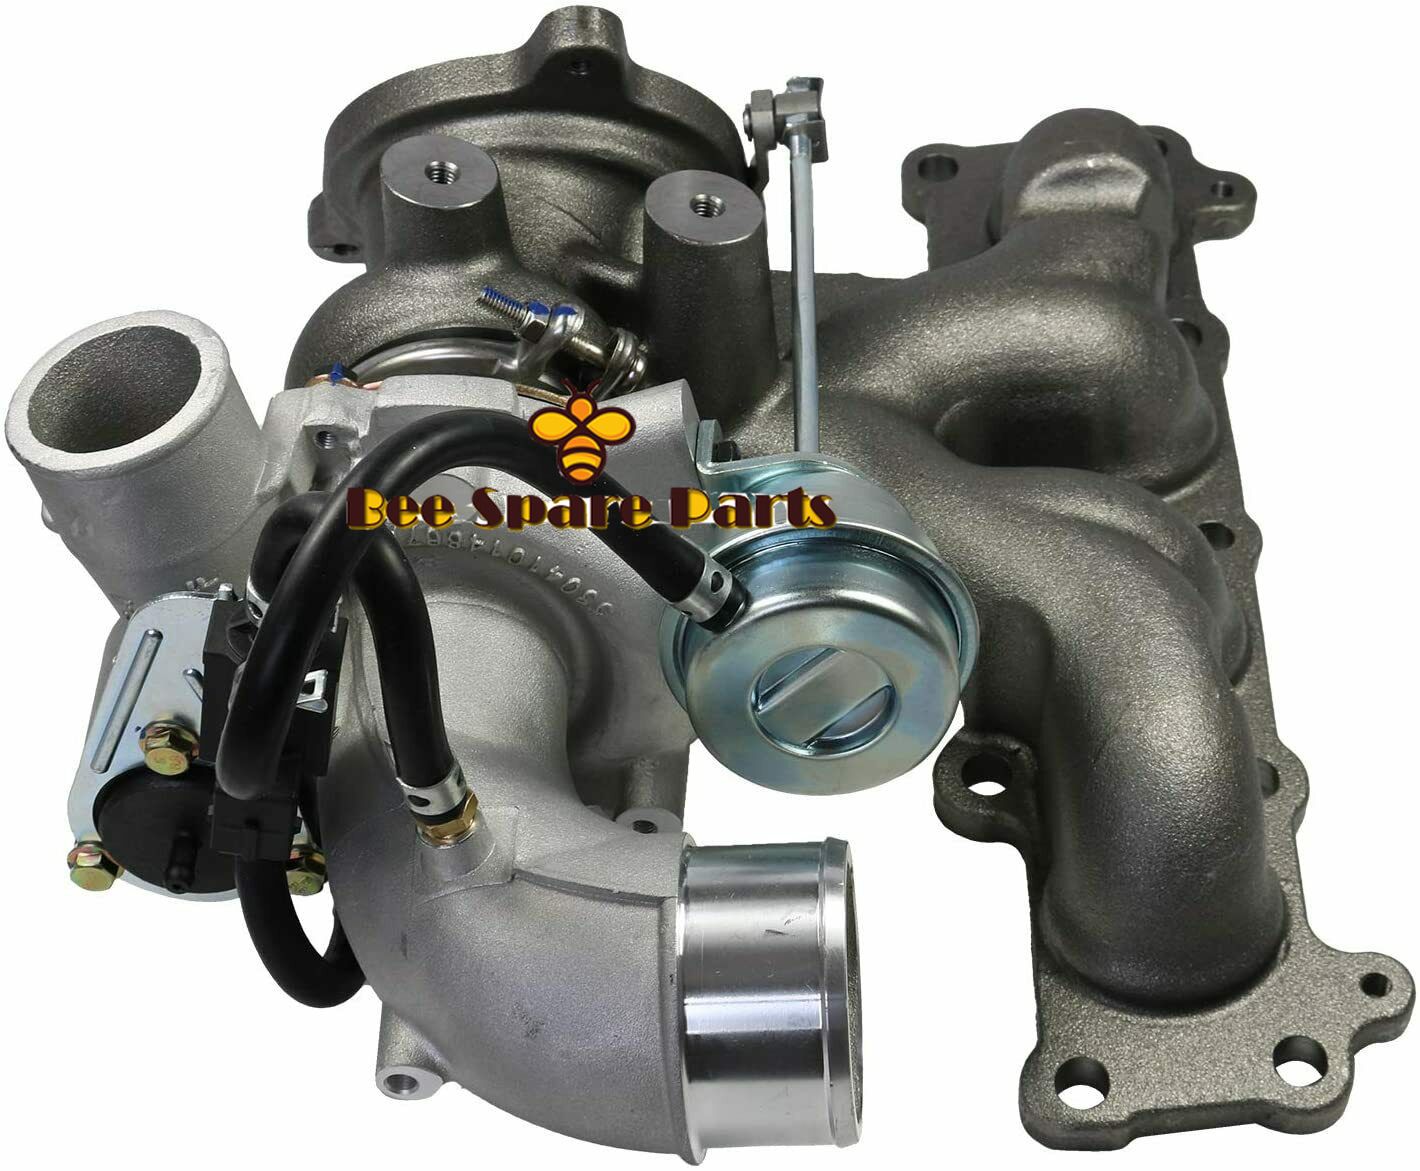 K03 Turbine Exhaust Housing 53039700154 53039880288 Turbo Manifold for Ford Galaxy WA6 2.0 EcoBoost 1999 ccm 149 KW 203 PS